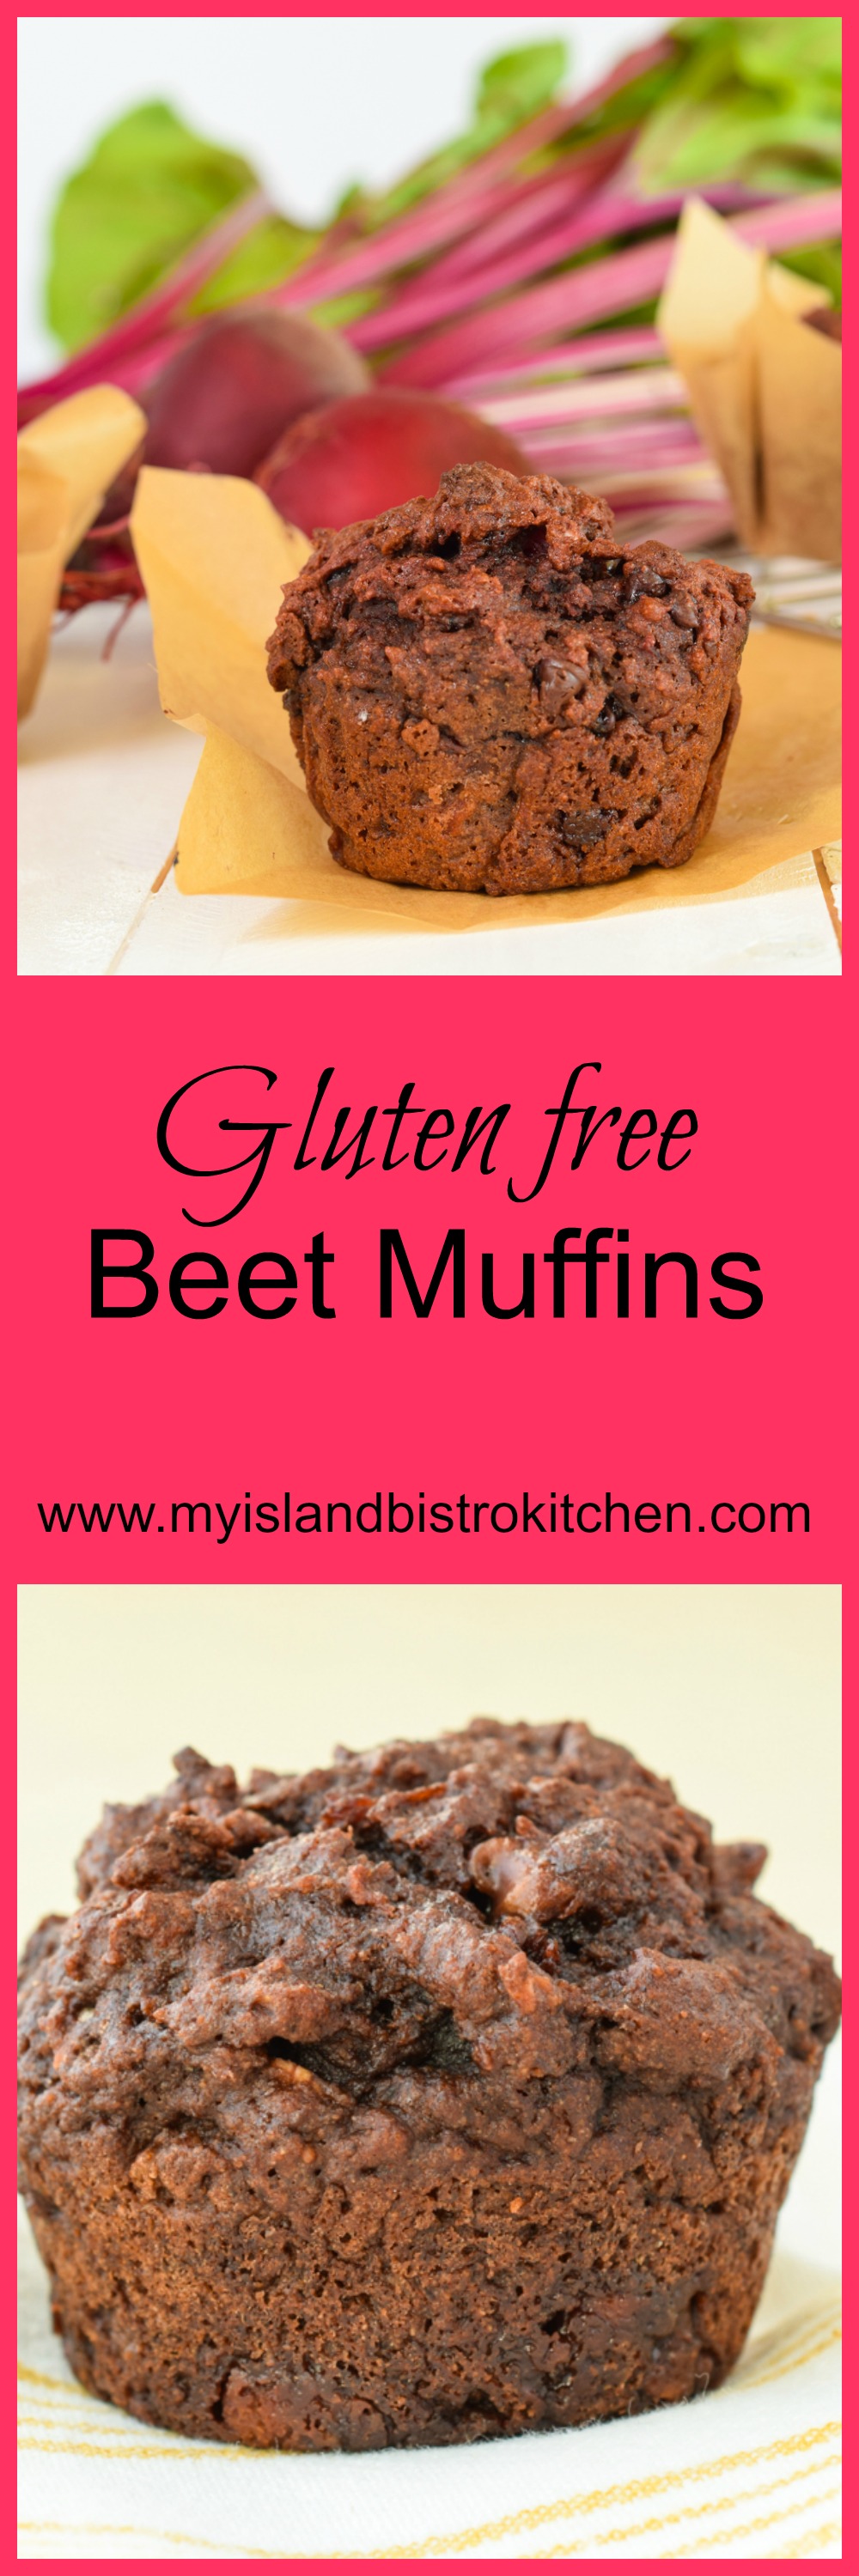 These delicious Deli-style Gluten-free Beet Muffins are made with cooked beets and chocolate to create moist,tasty muffins.